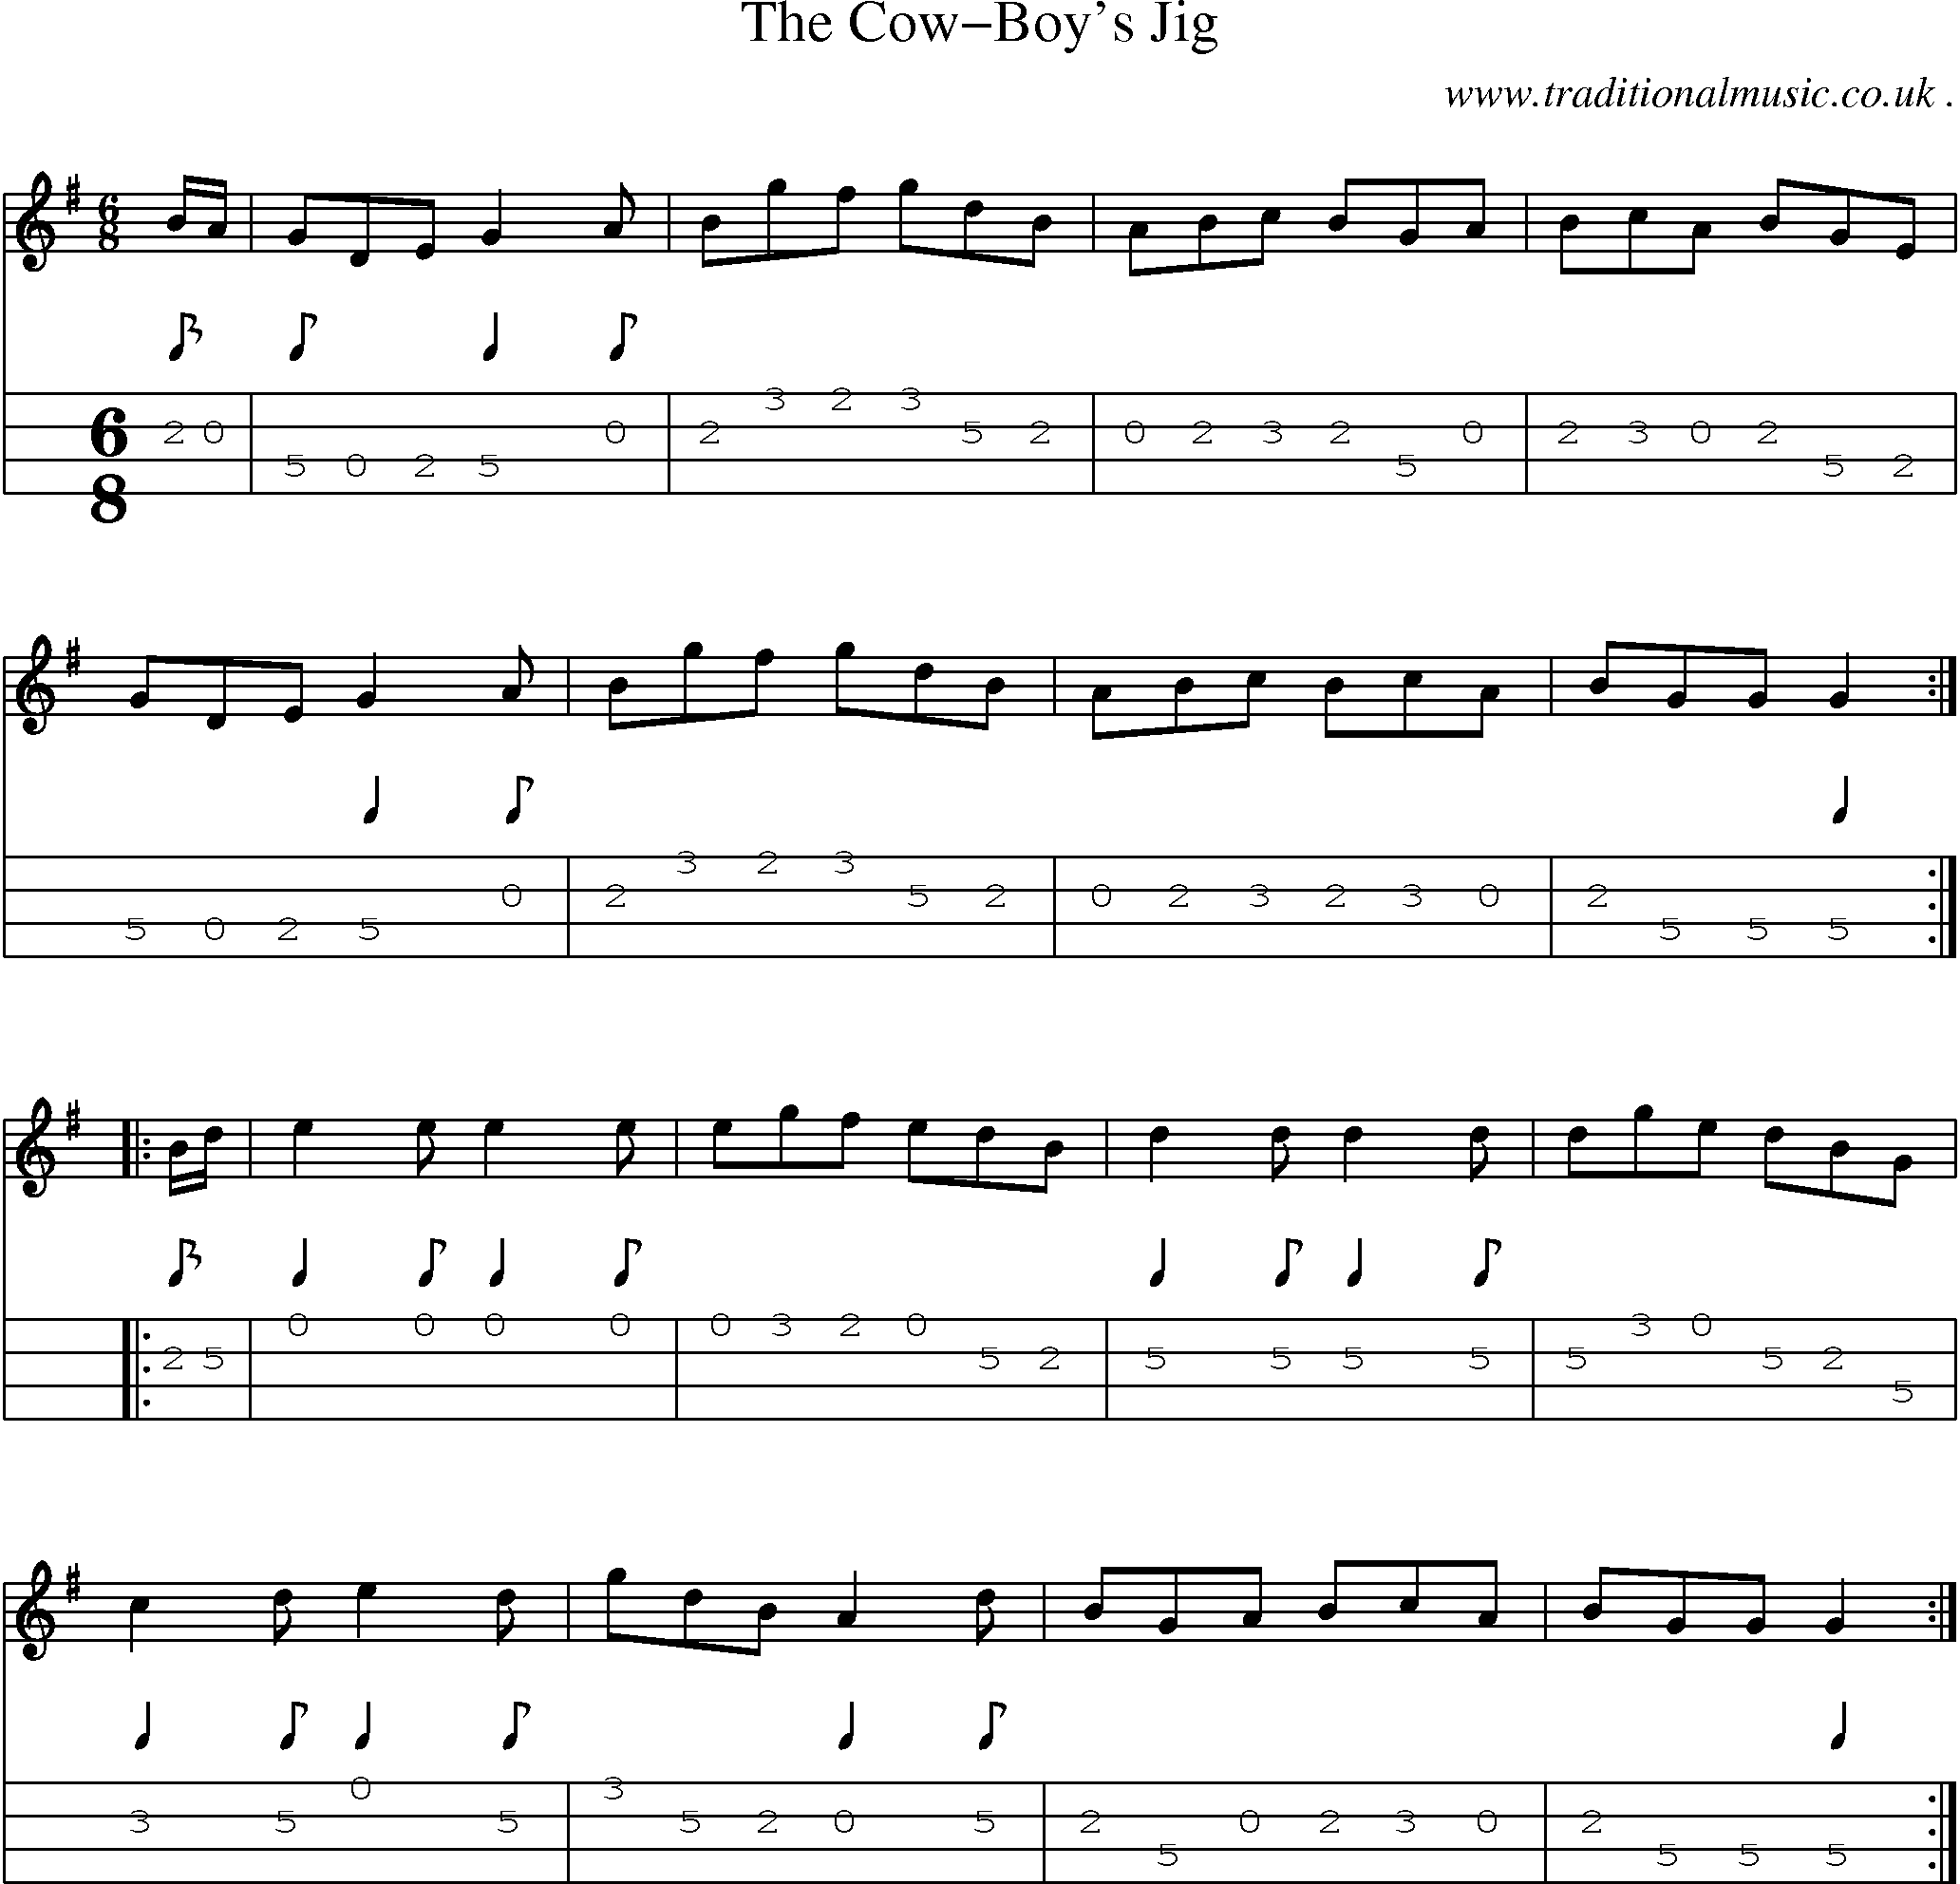 Sheet-Music and Mandolin Tabs for The Cow-boys Jig